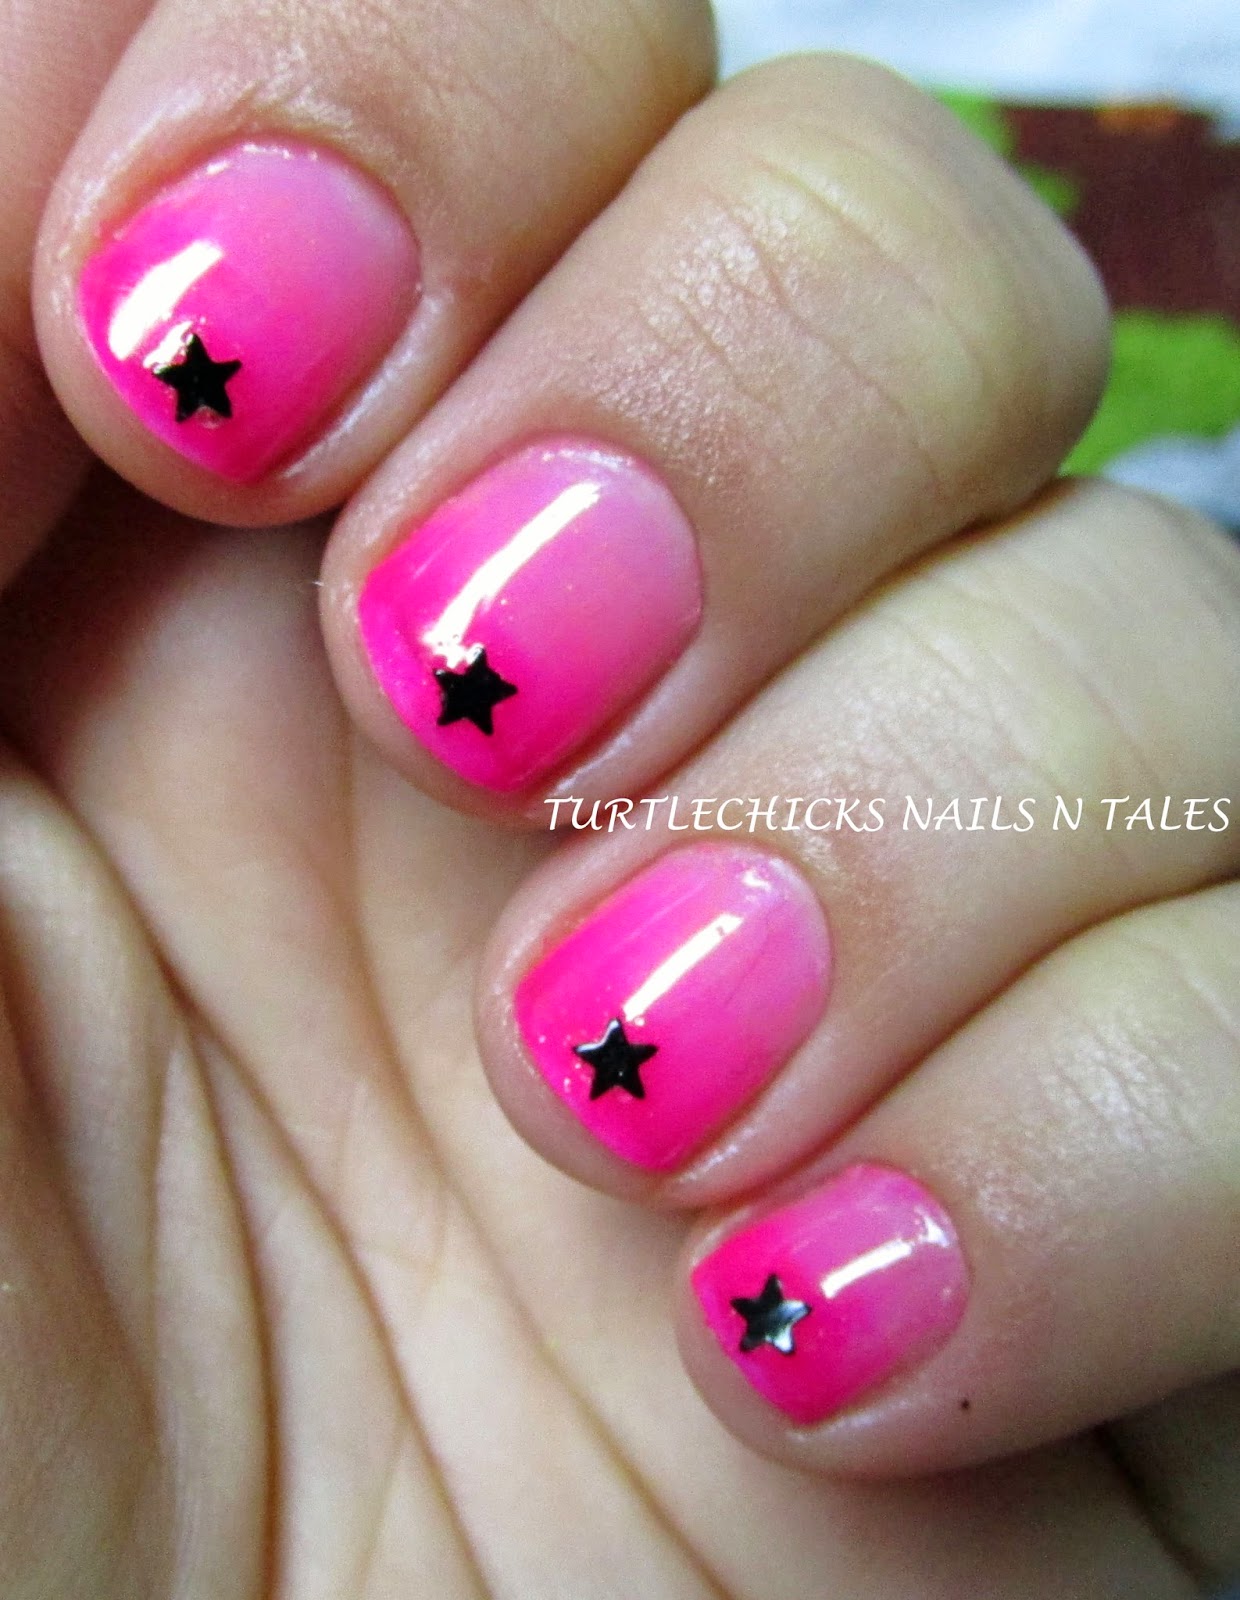 Turtlechick's Nails N Tales: Hot Pink Stars